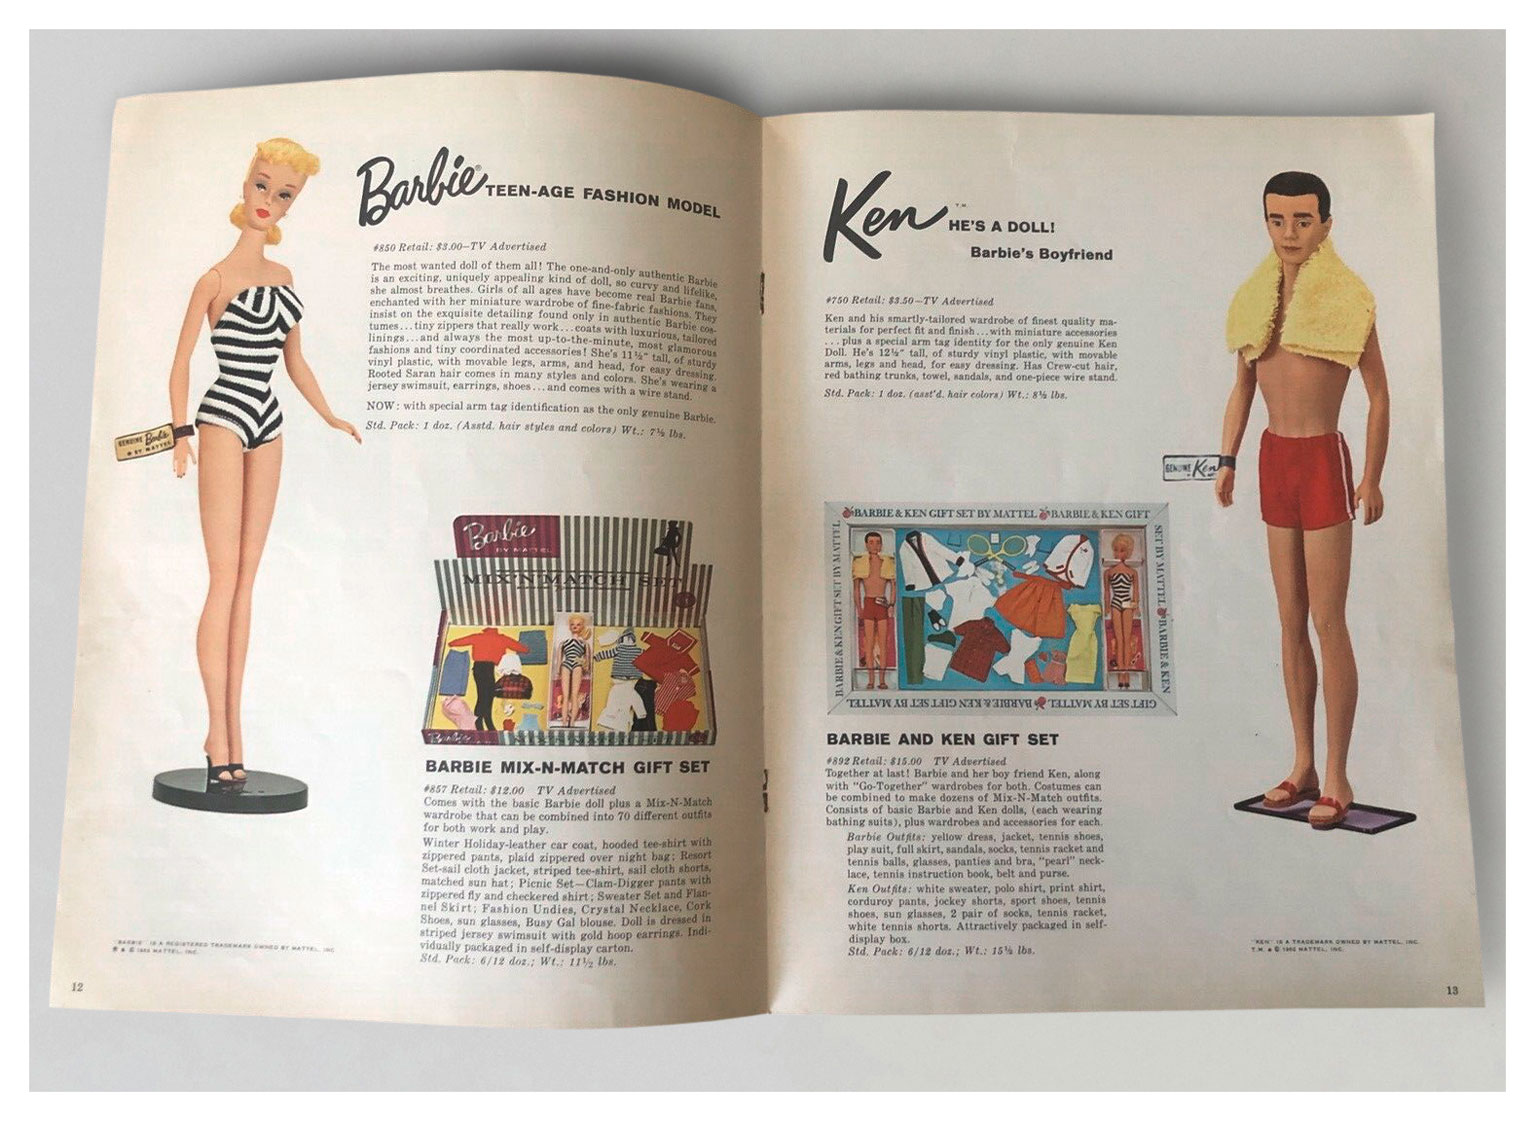 From Mattel Dolls For Fall '62 catalogue